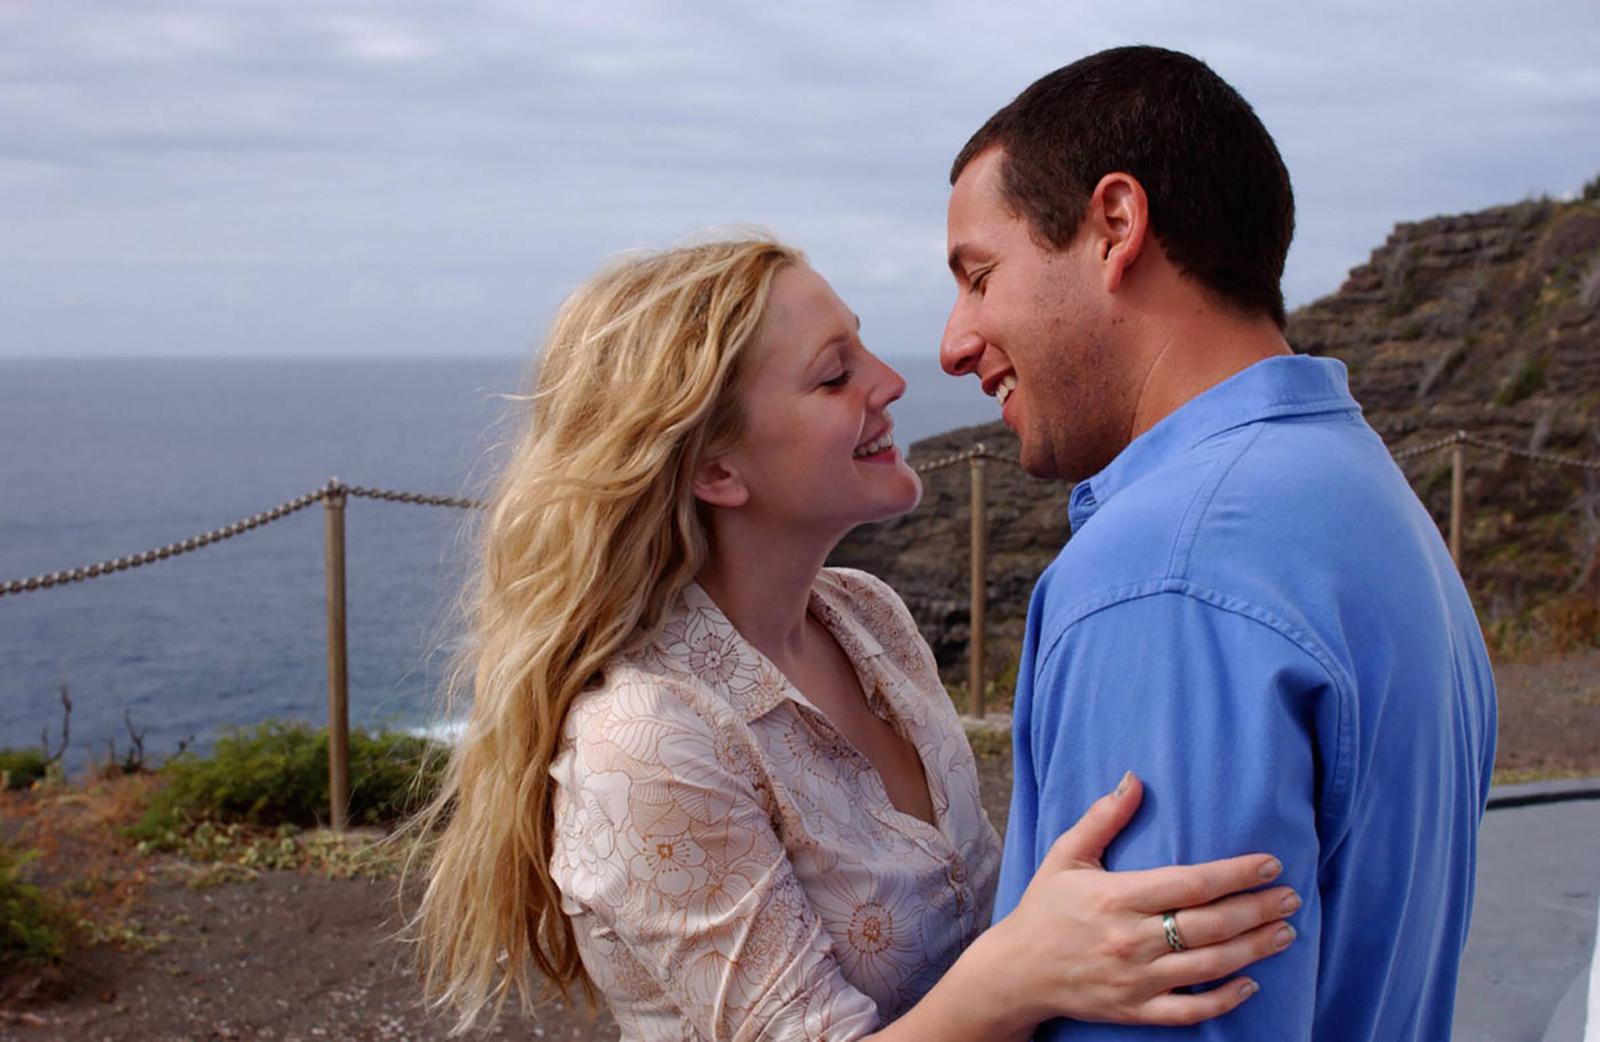 Adam Sandler's Romantic Side: 5 Must-watch Films That Will Make You Laugh and Swoon - image 2